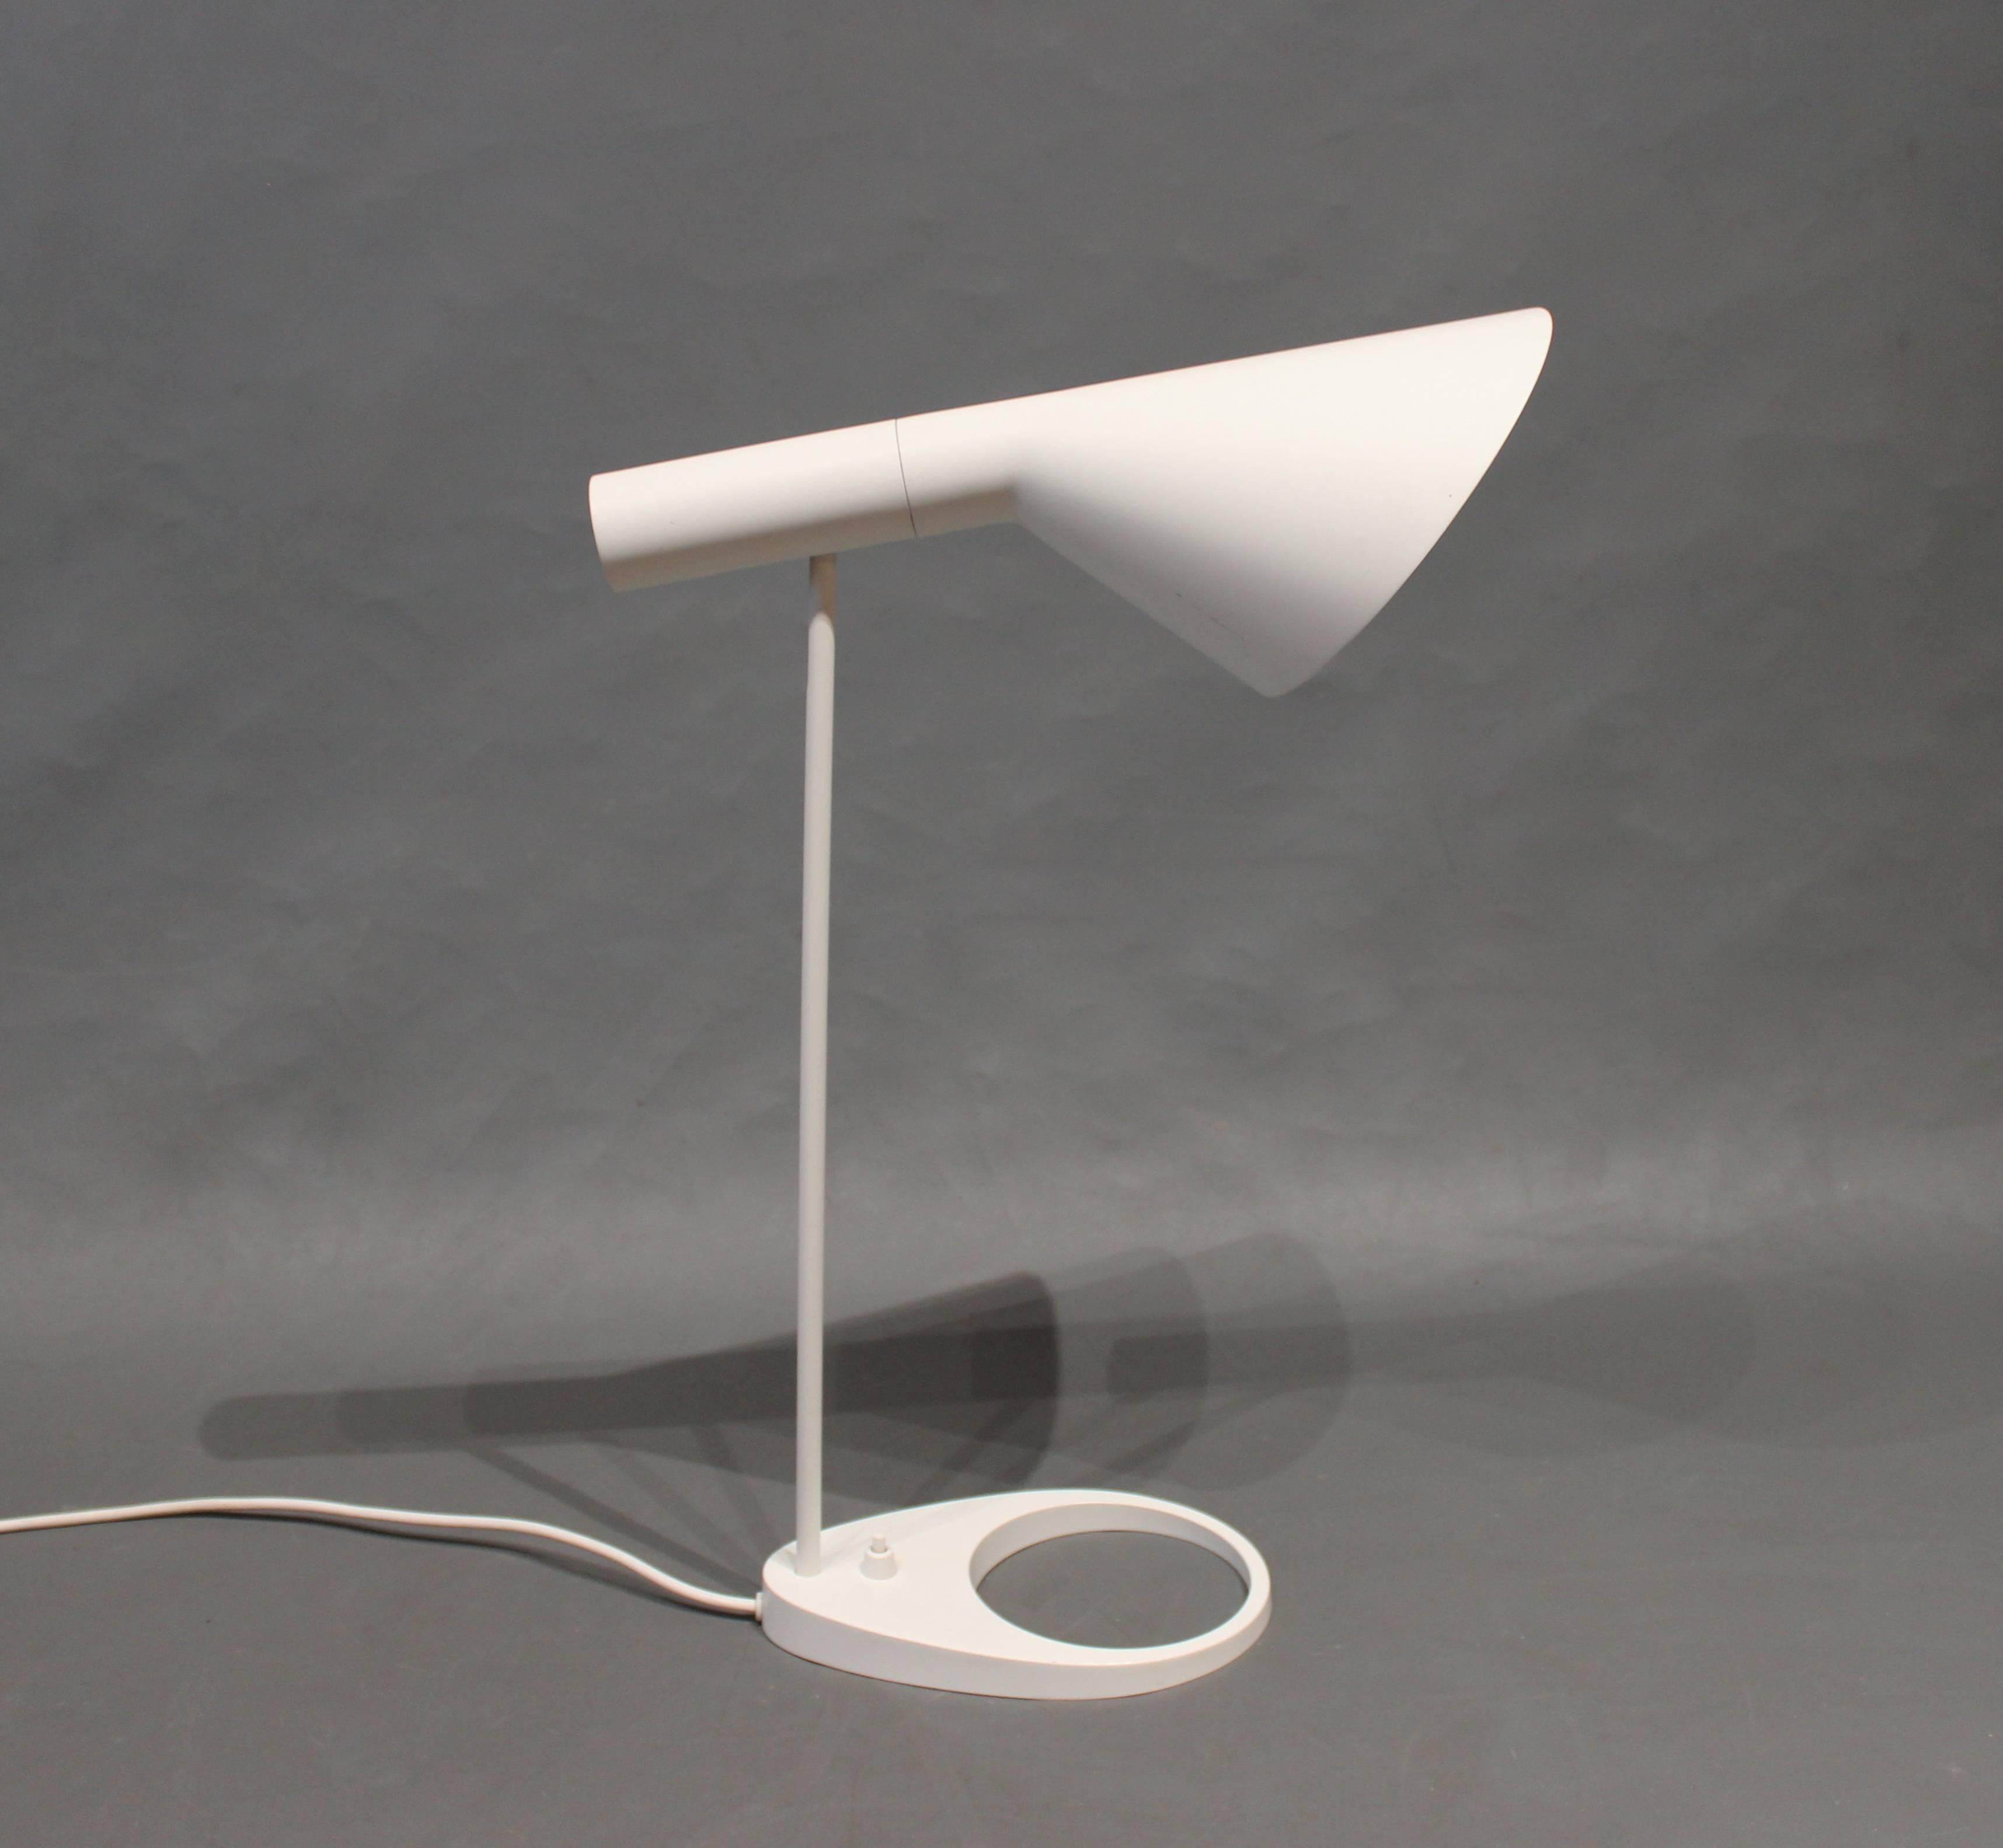 Danish Arne Jacobsen, White Table Lamp, Designed in 1960 and by Louis Poulsen